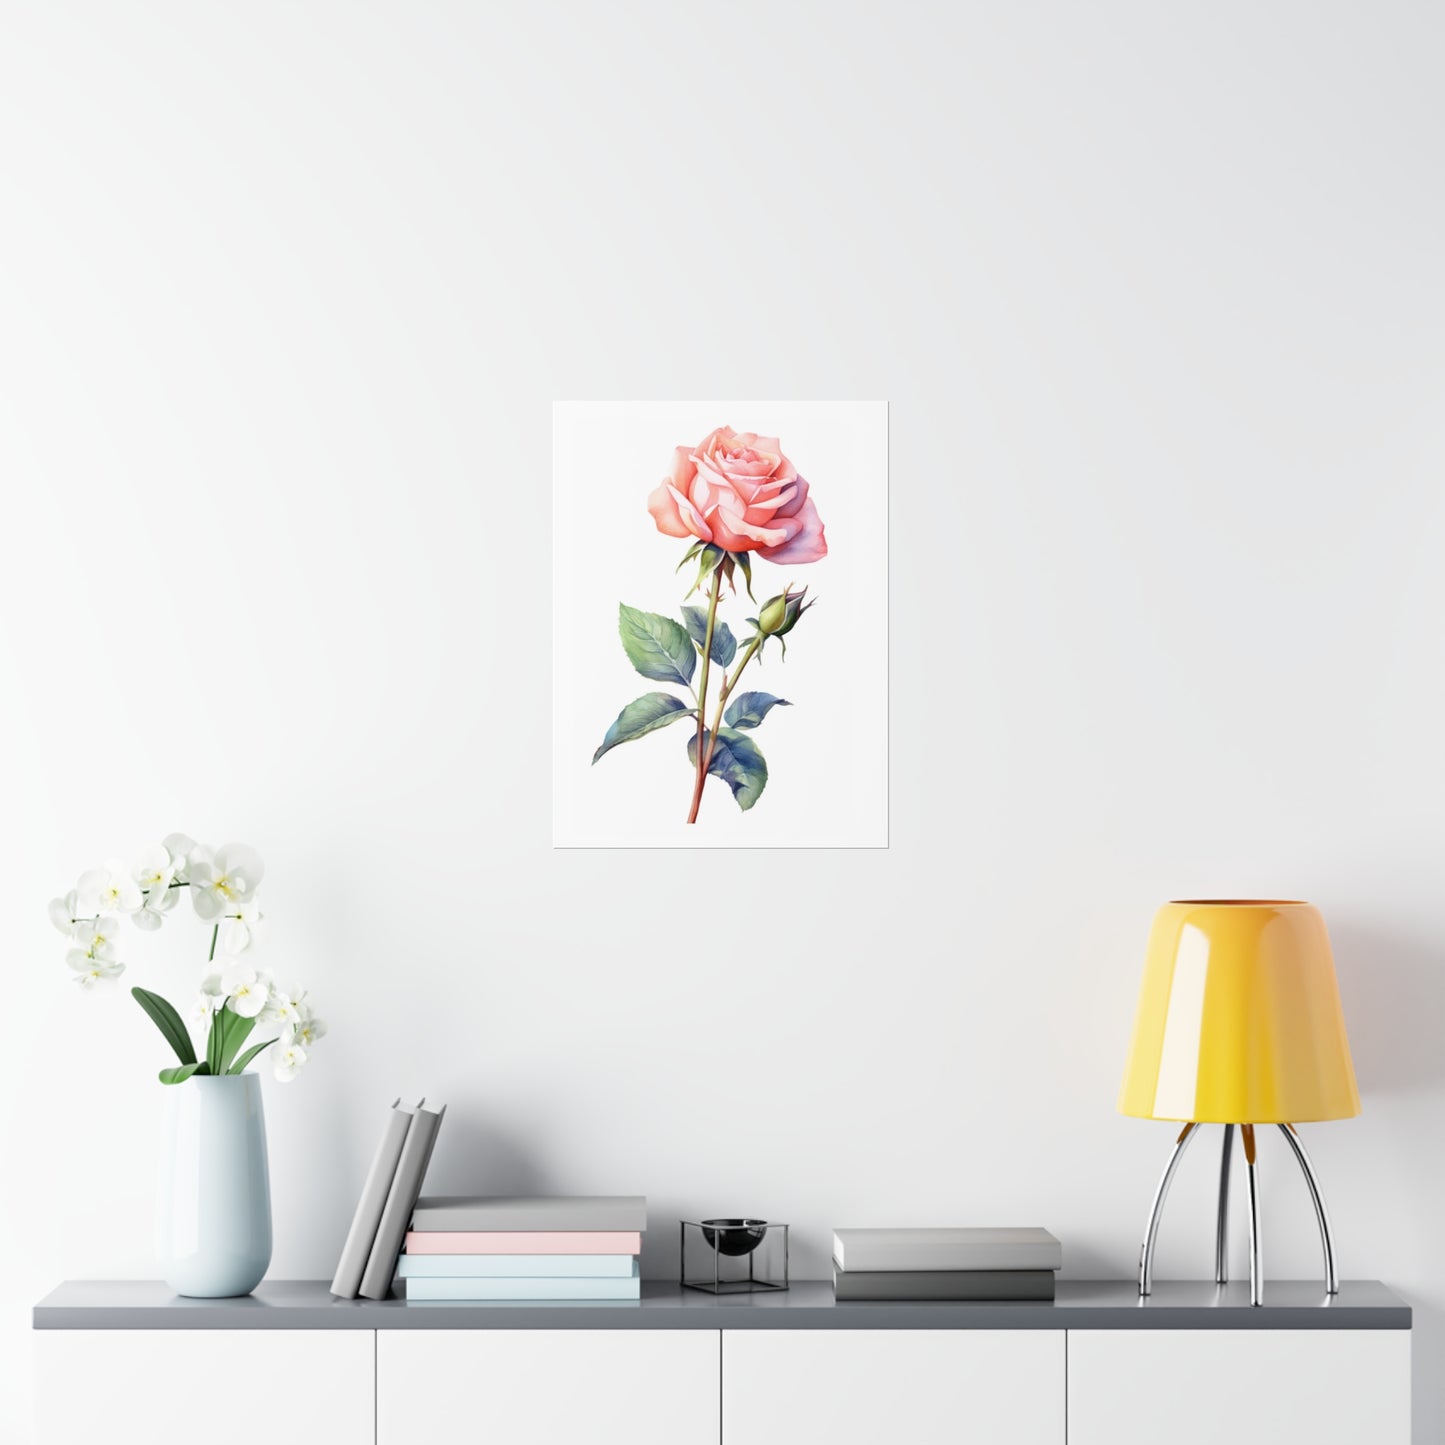 Pink Rose Poster Print, Watercolor Floral Flower Picture Wall Image Art Vertical Paper Artwork Small Large Cool Room Office Decor